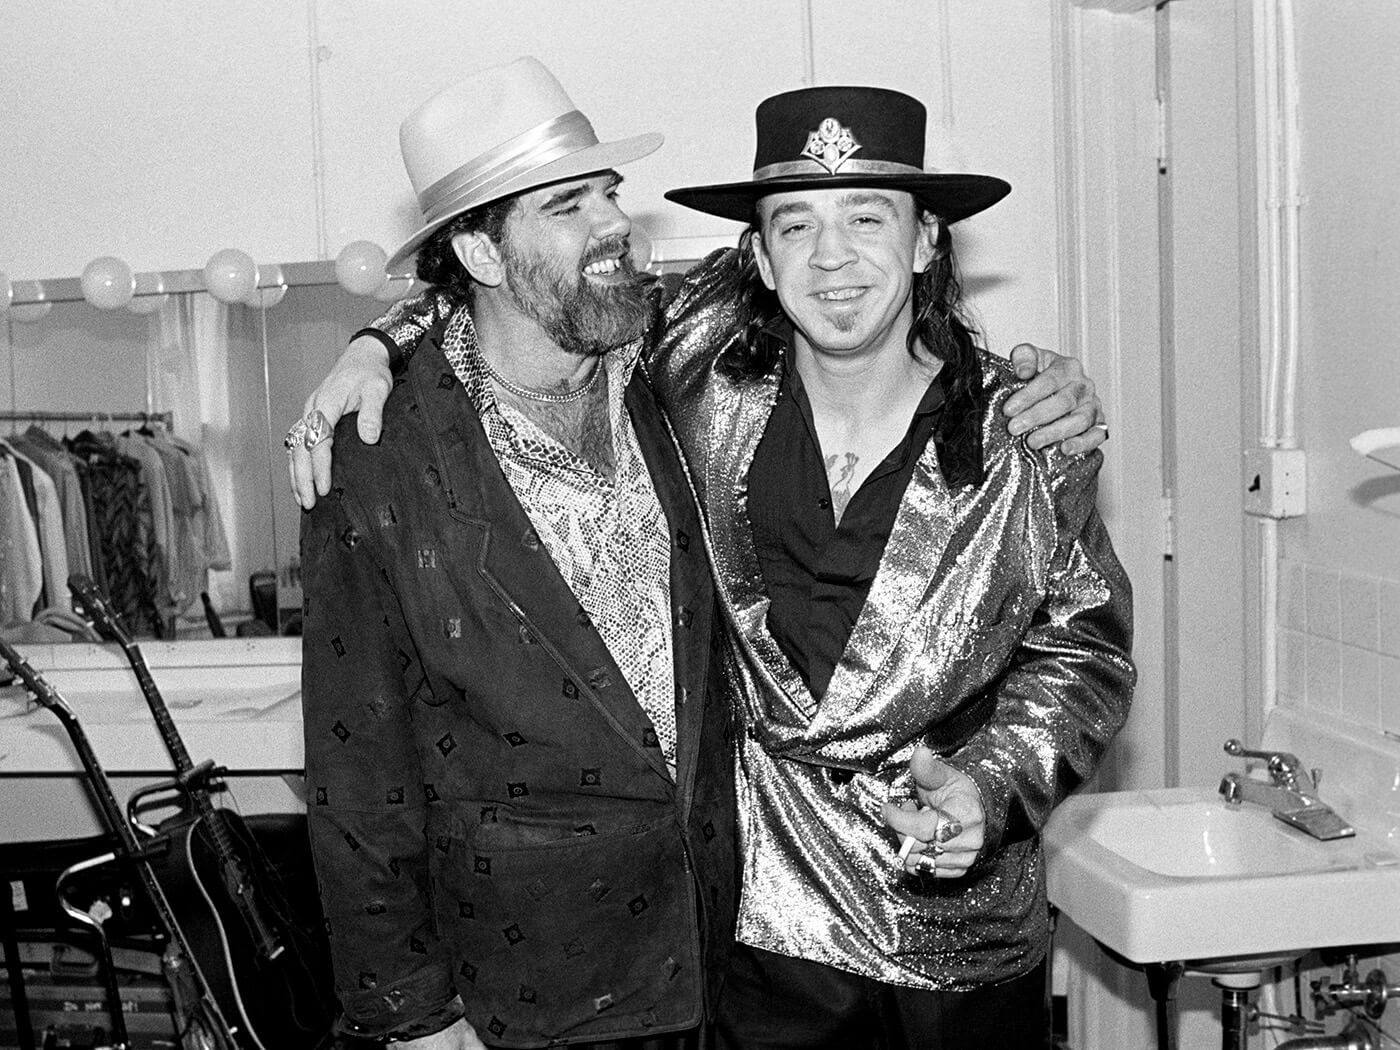 Lonnie Mack and Stevie Ray Vaughan